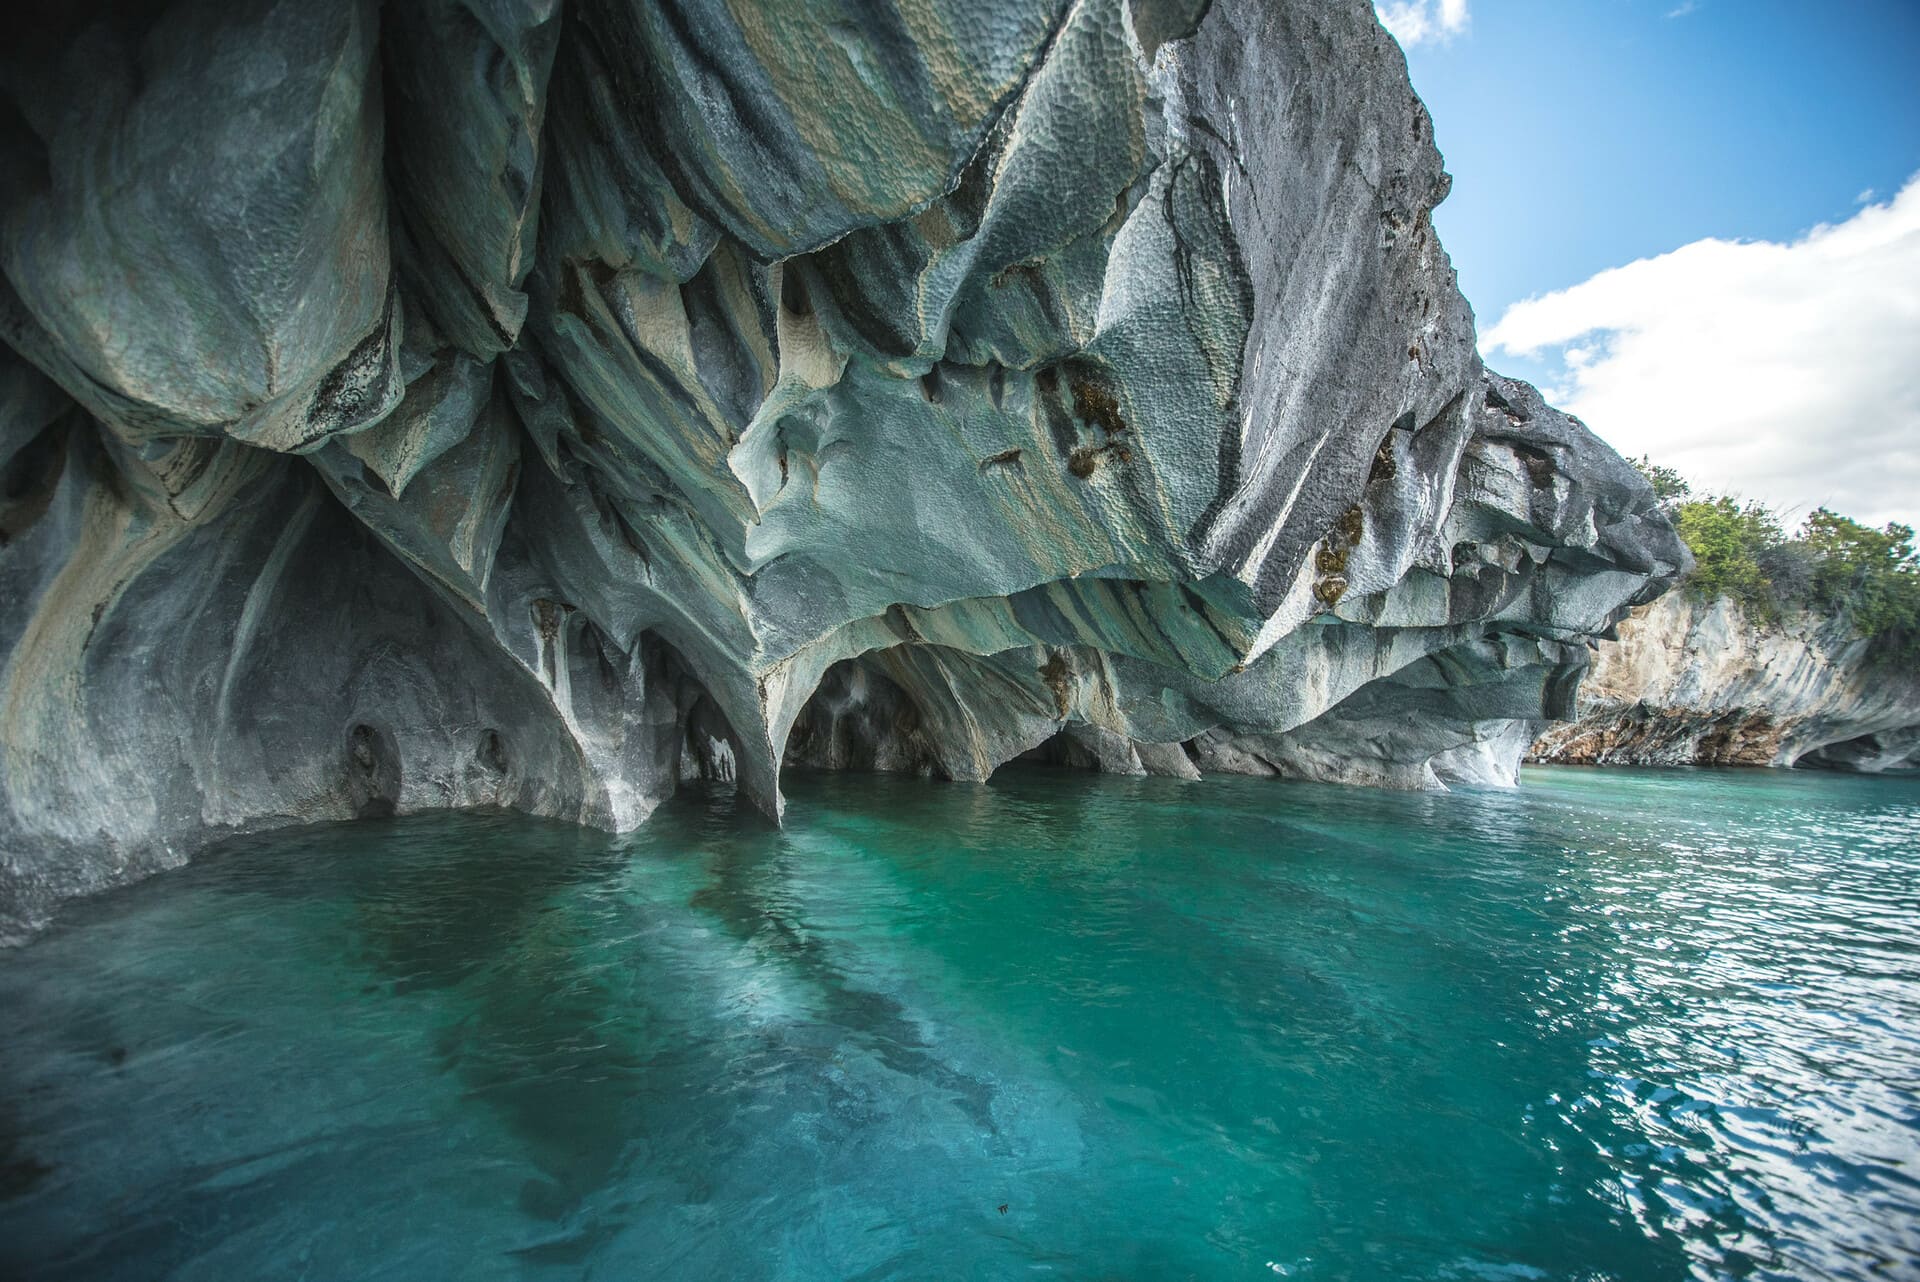 Marble Caves - Carretera Austral (7)